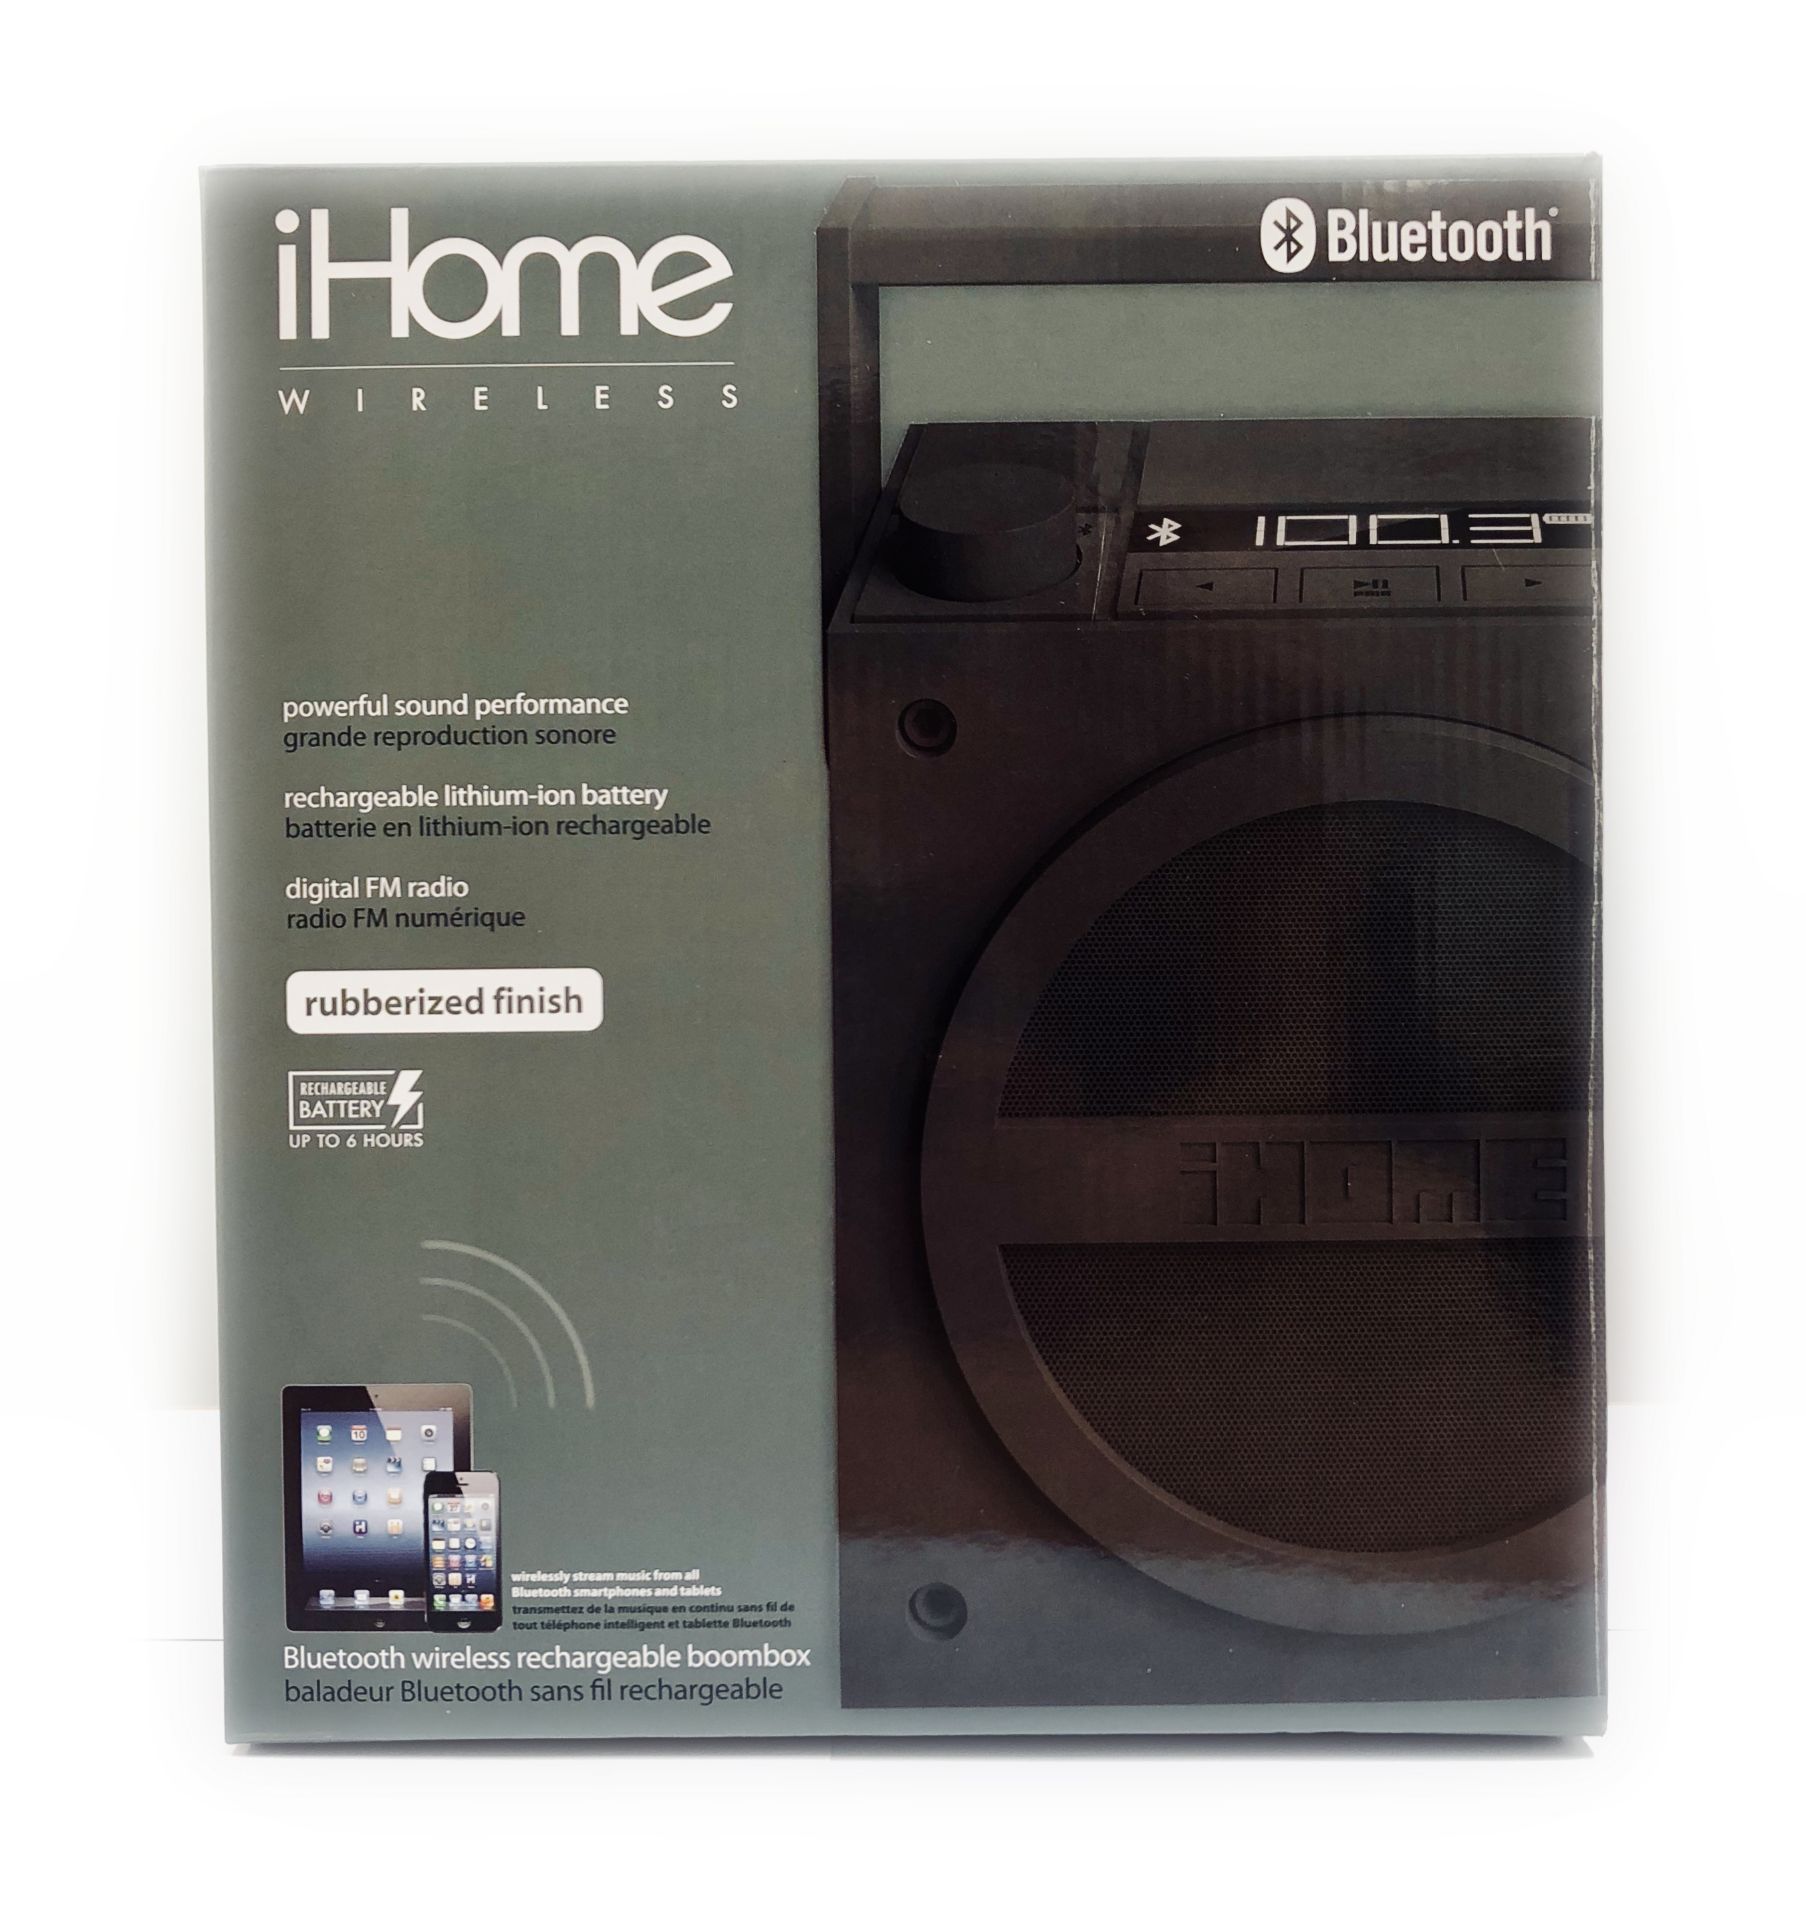 V Brand New iHome Wireless Bluetooth Rechargeable Boom Box - ISP £39.95 (Radioworld UK) - Up to 6 - Image 7 of 8